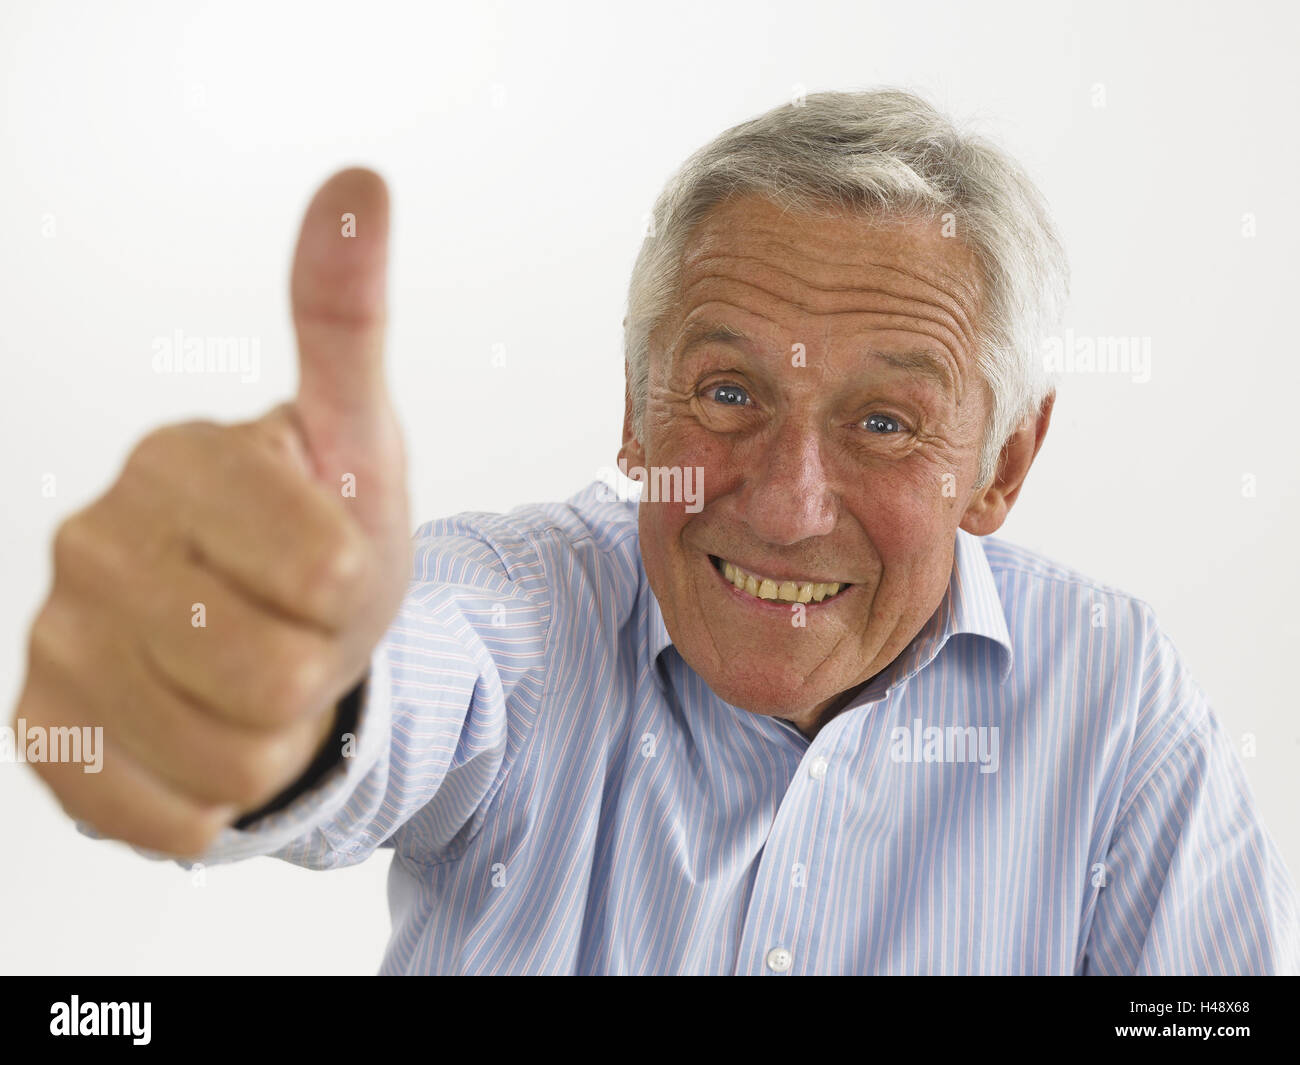 Senior, gesture, pollex high, portrait, model released, people, man, grey-haired, joy, enthusiasm, joy life, indicate, happy, studio, inside, cut out, Stock Photo